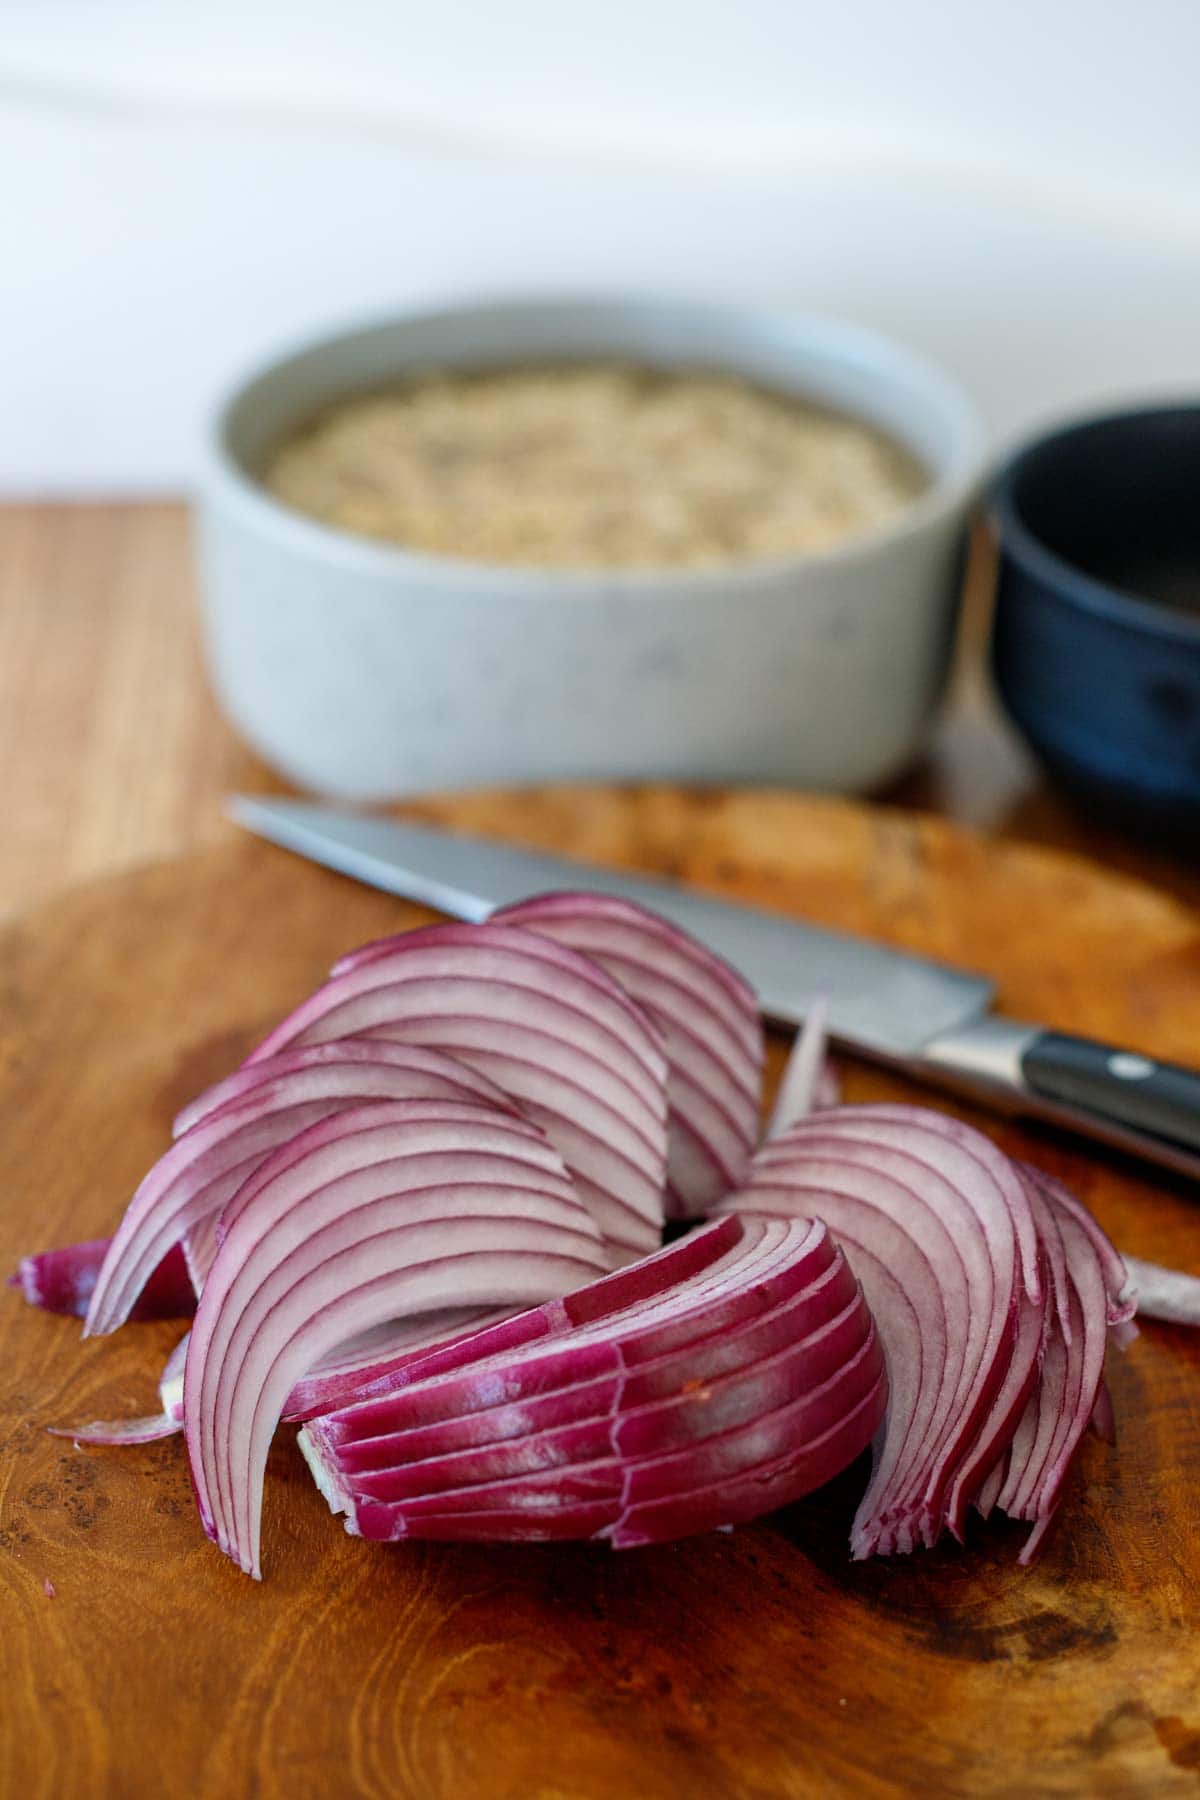 thinly sliced red onion on wood cutting board.